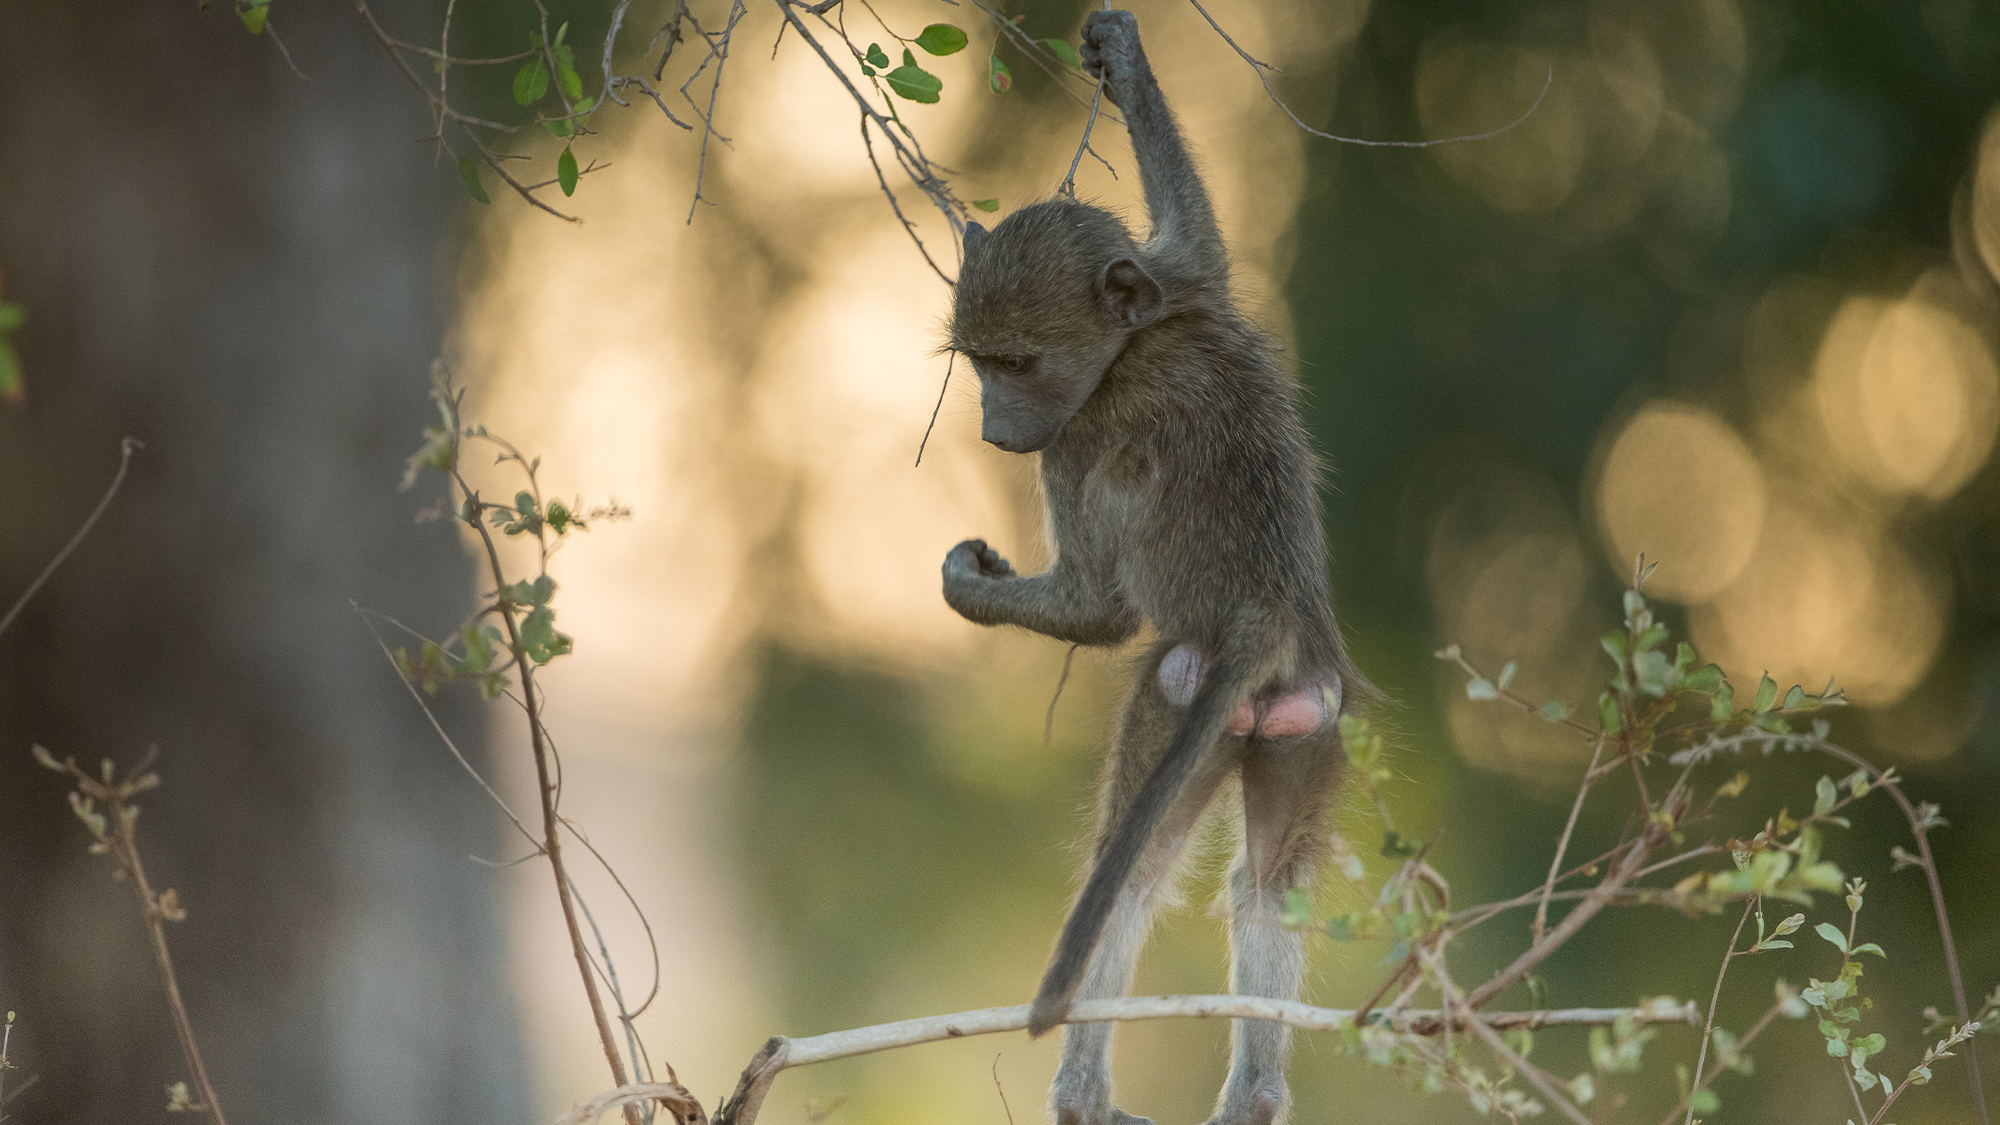 Loving adult friendships help baboons recover from a traumatic childhood